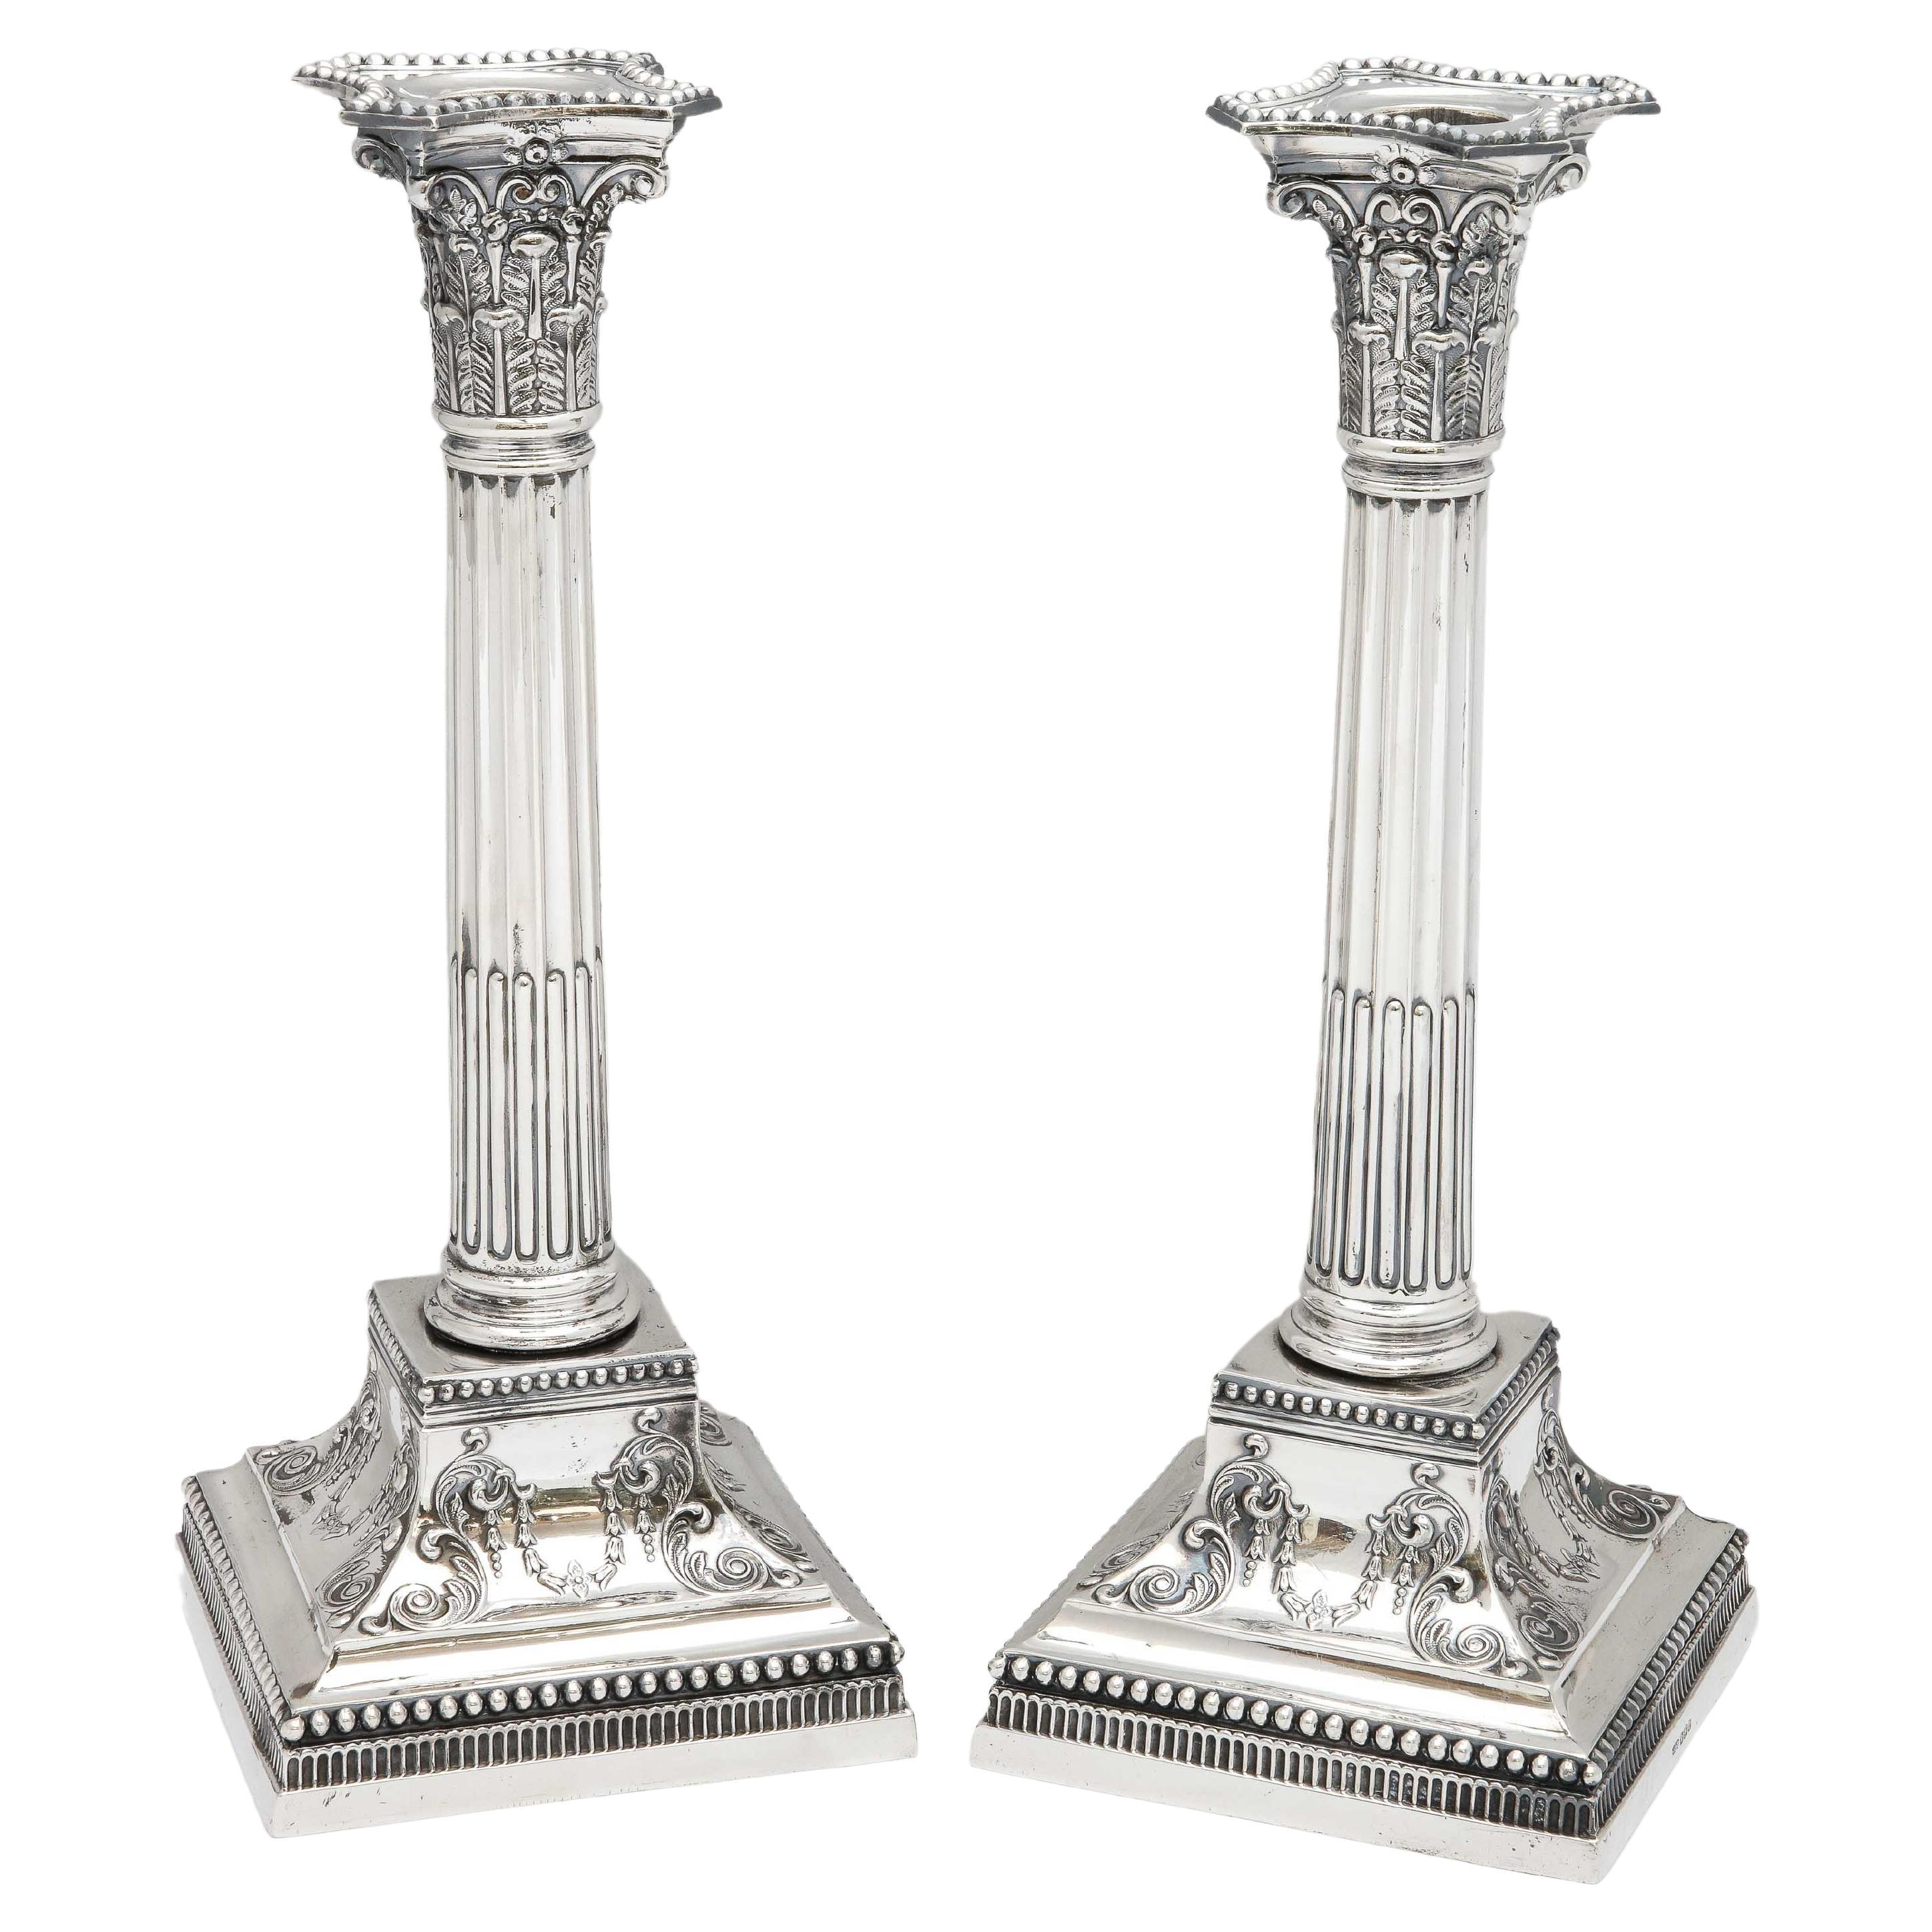 Pair of Neoclassical-Style Tall Sterling Silver Corinthian Column Candlesticks